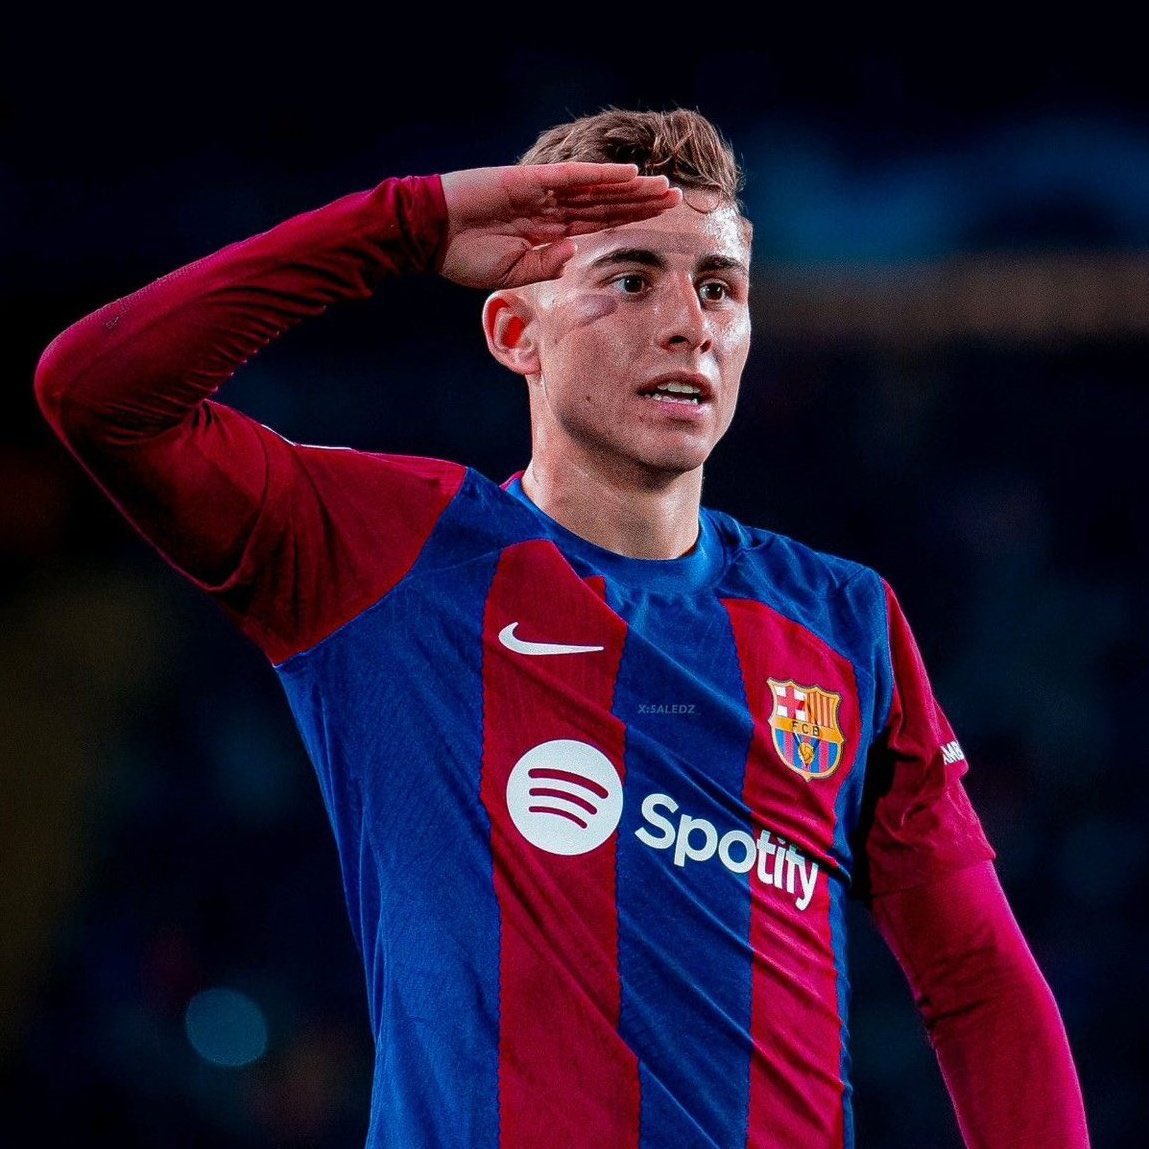 Goal against Napoli in the Champions League round of 16 

Goal against Atletico Madrid at the Metropolitano

Goal against Real Madrid at the Bernabéu

Fermin López is one of the best players of this Barca season, He is him!!